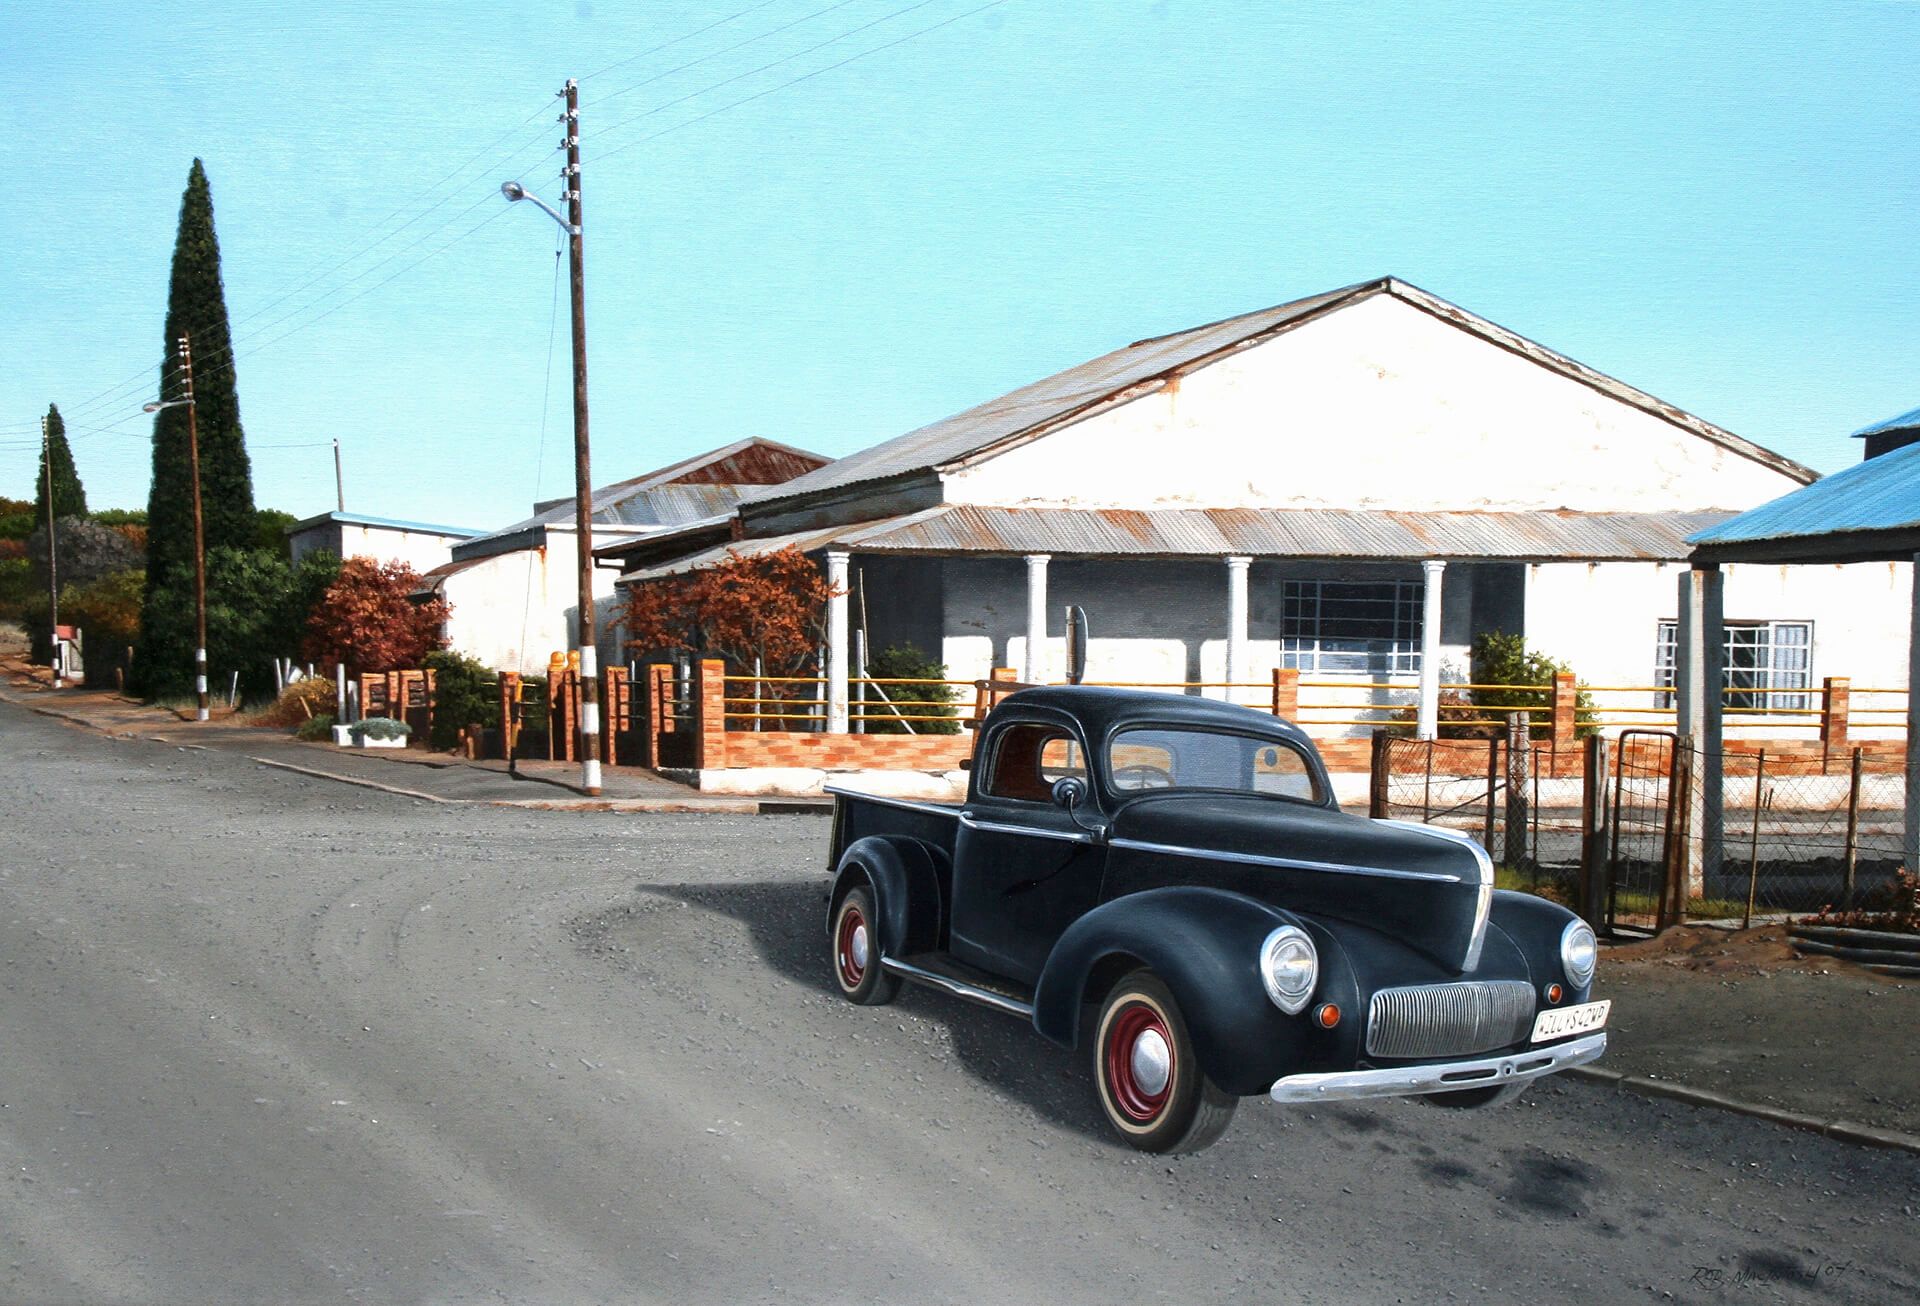 Photorealistic painting of an old Karoo